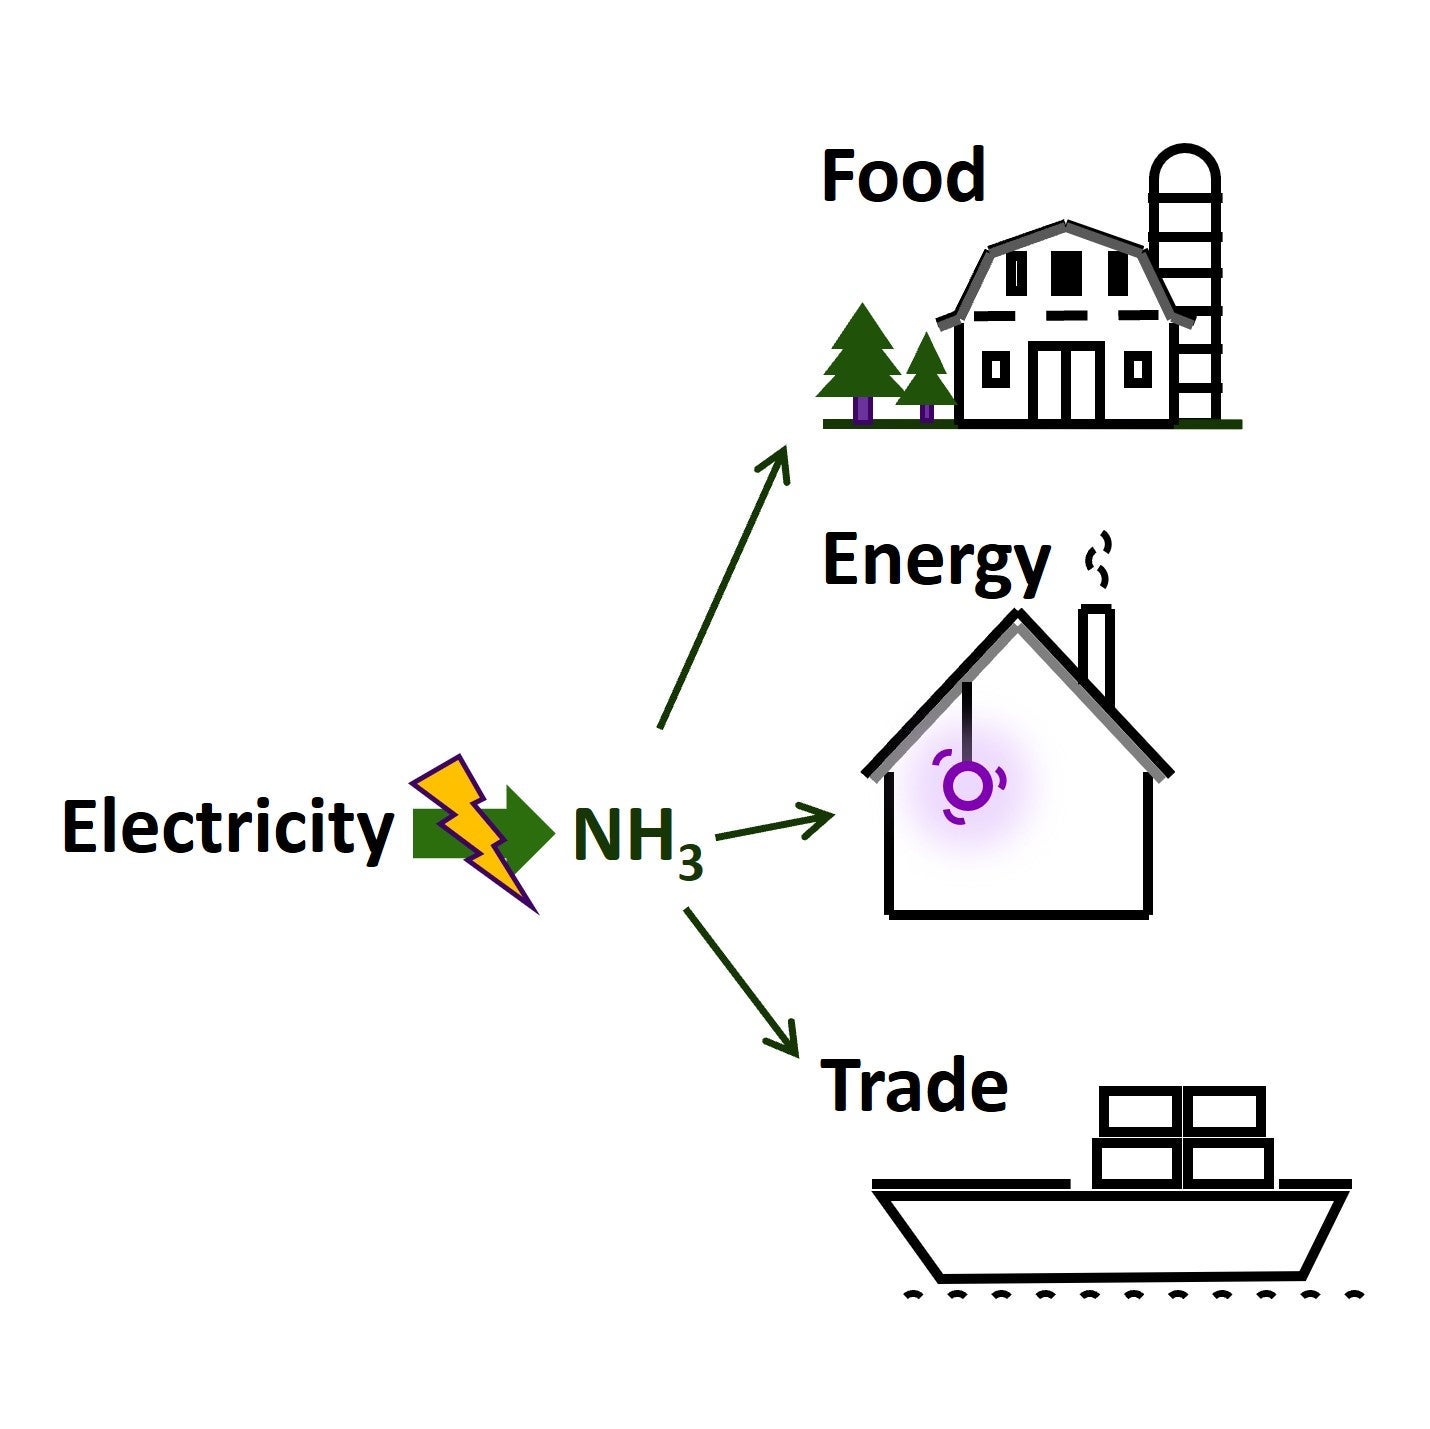 ammonia is used in the food, energy and trade sectors